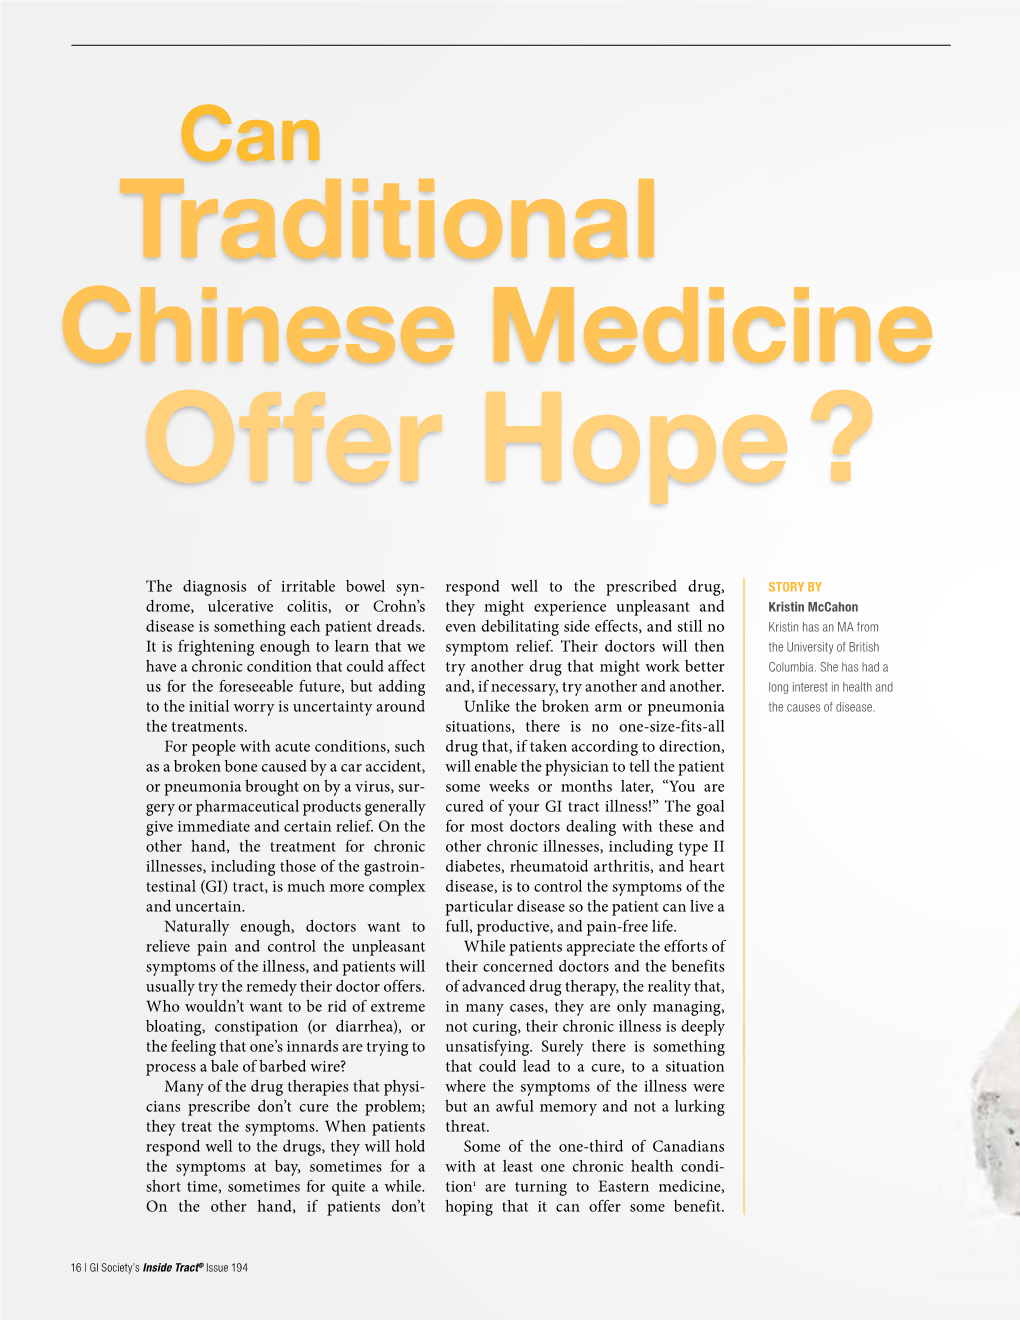 Can Traditional Chinese Medicine Offer Hope?